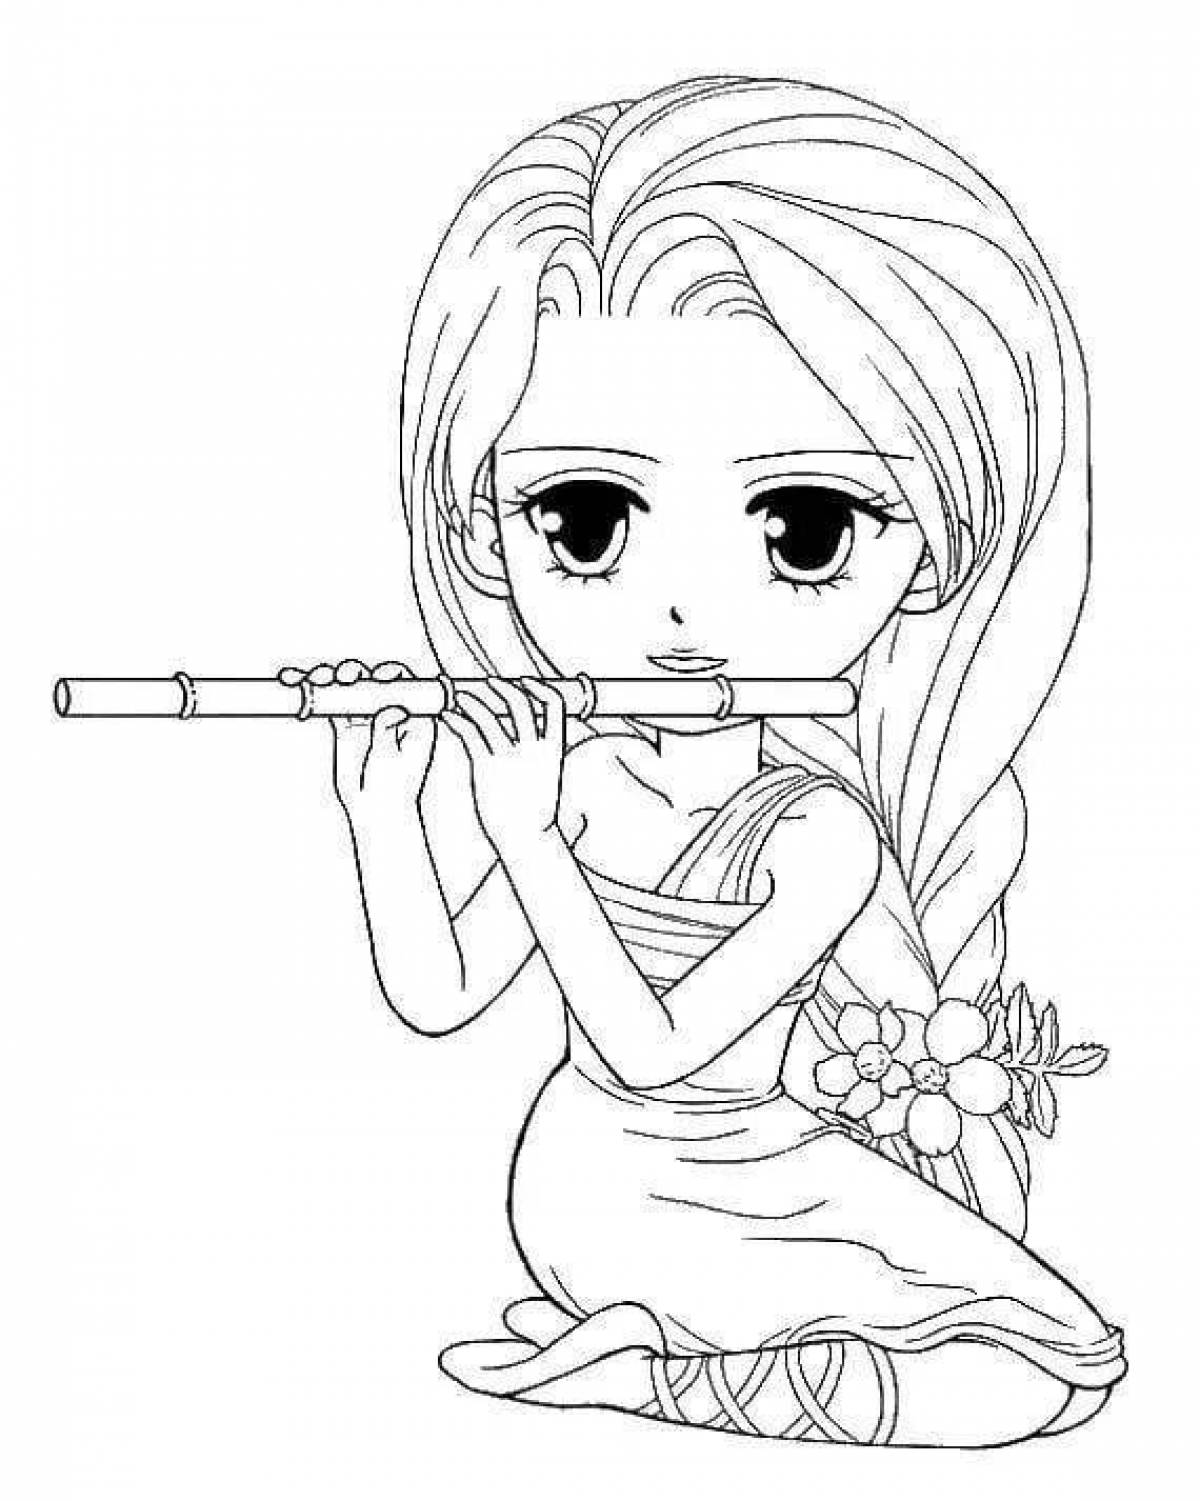 Dazzling coloring page 12 for girls